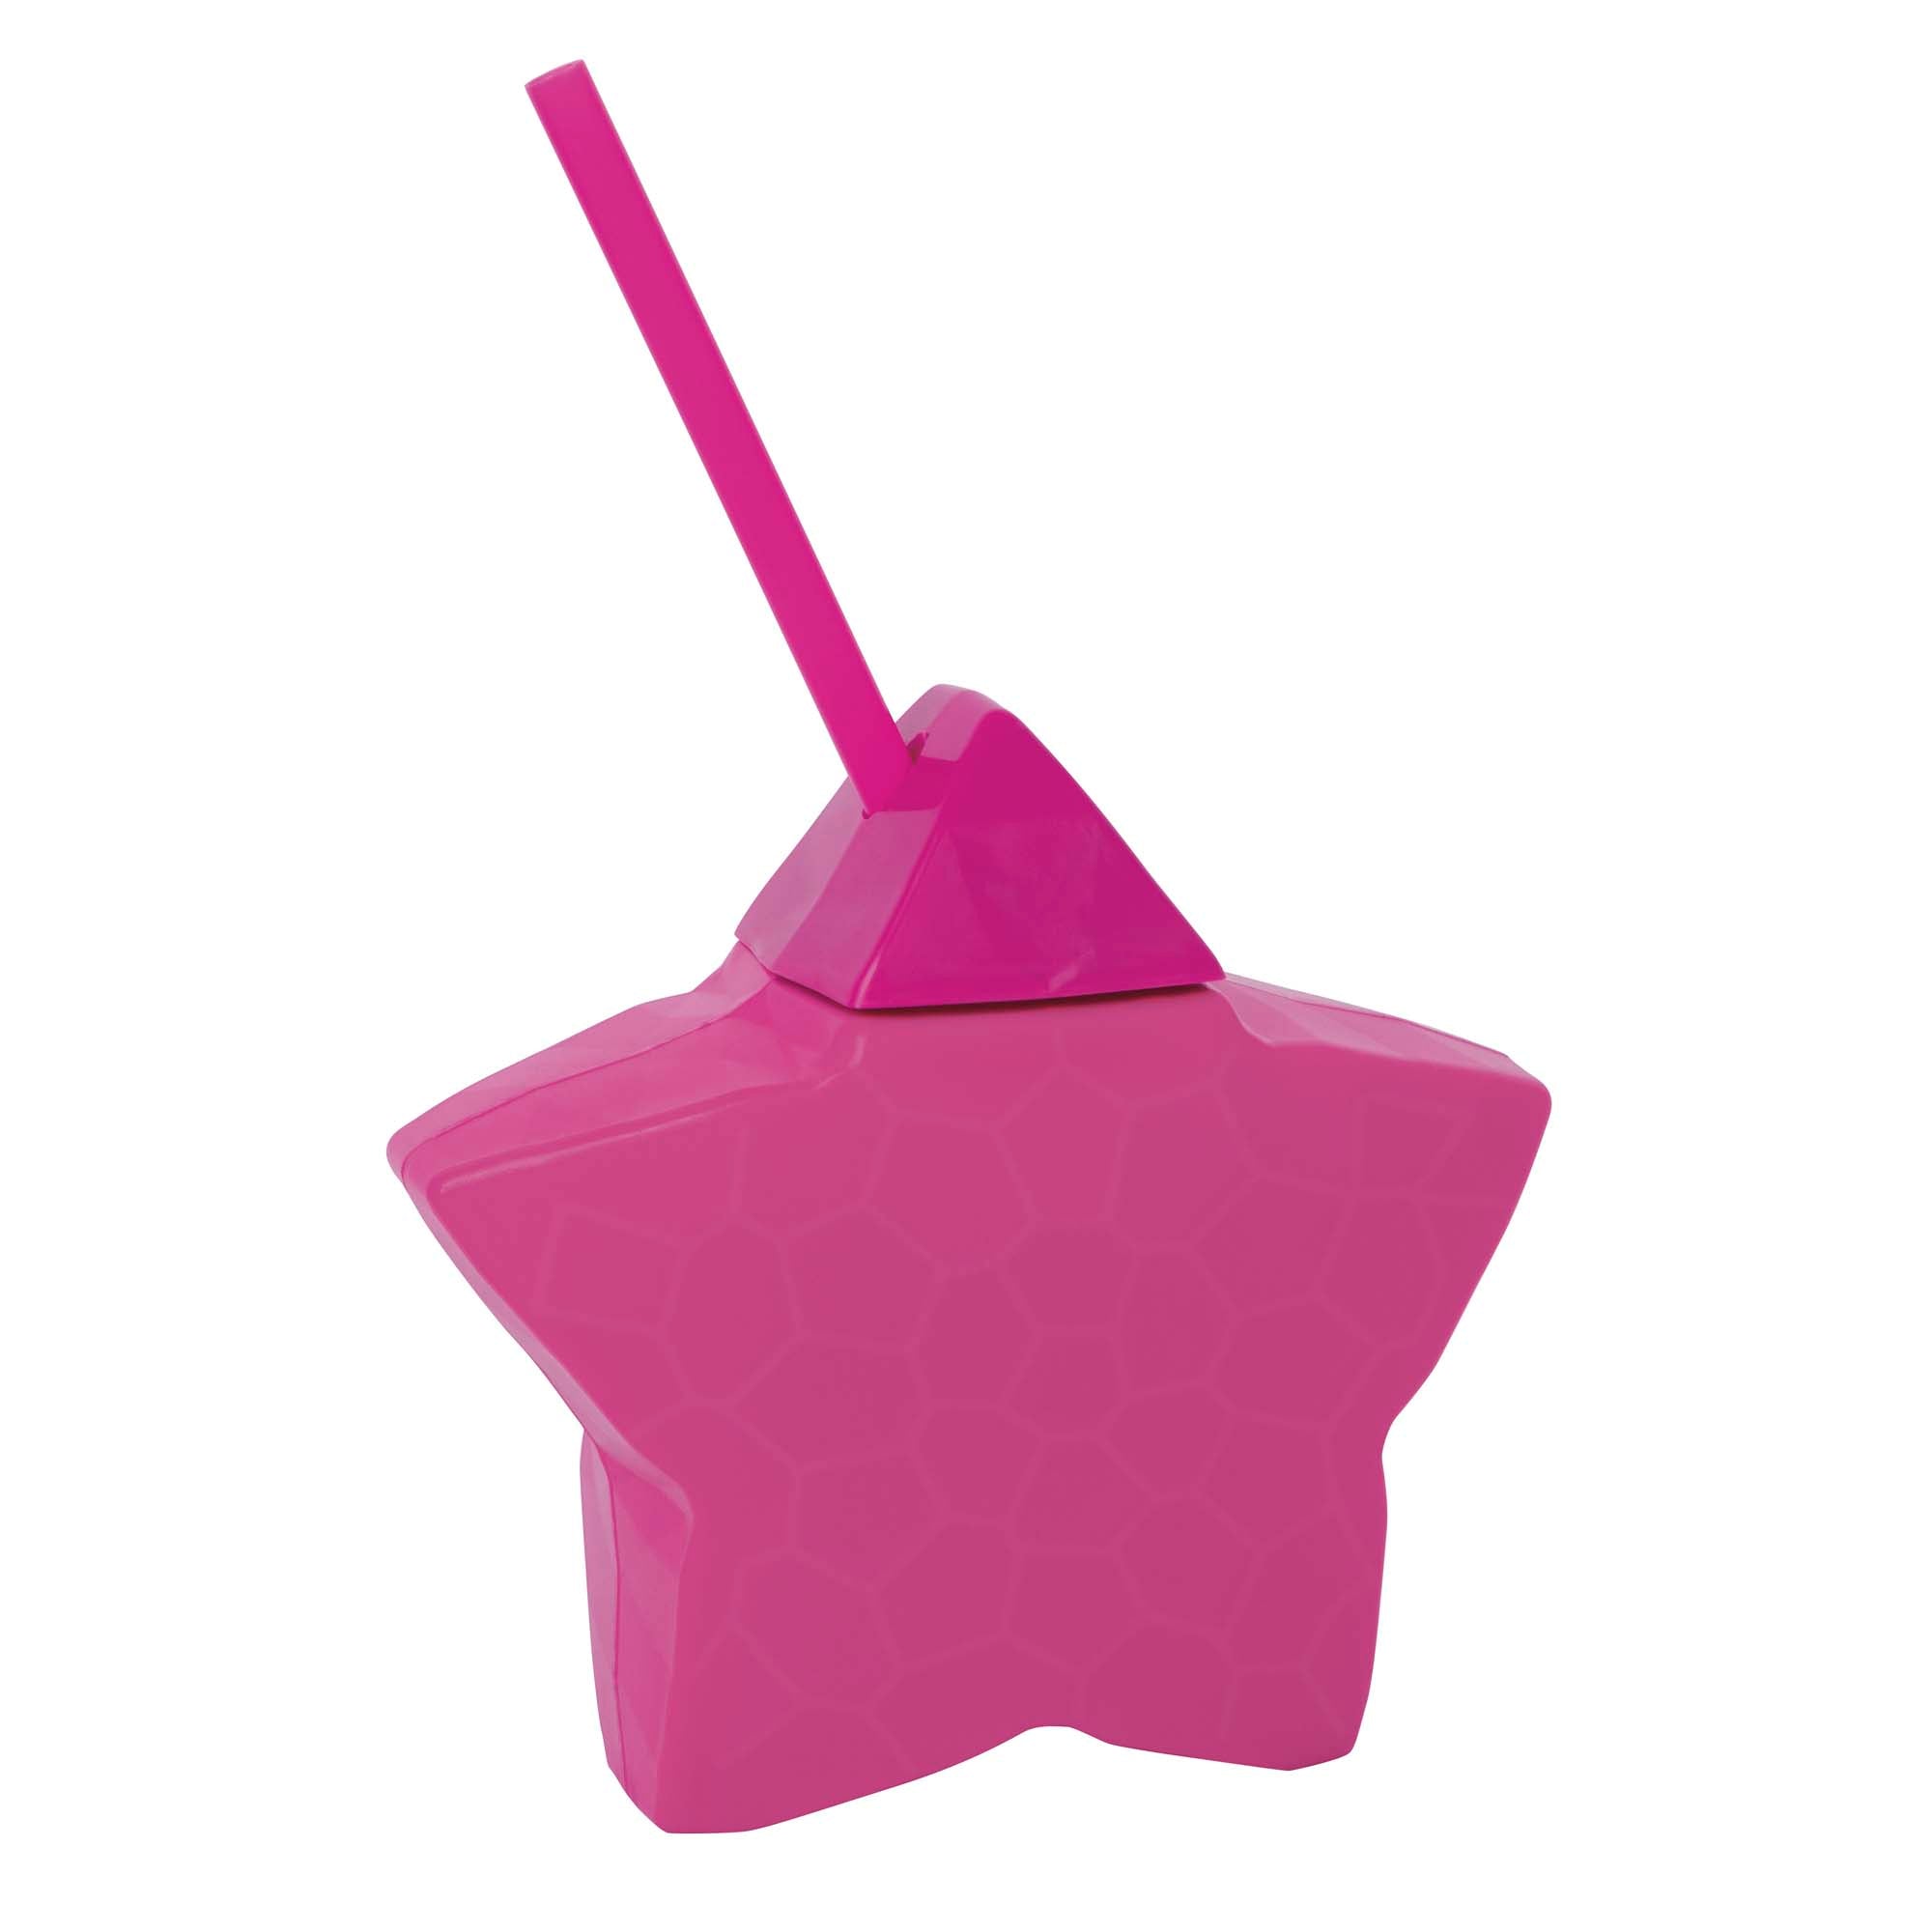 Celestial Pink Star Shaped Cup with Straw, 1 Count